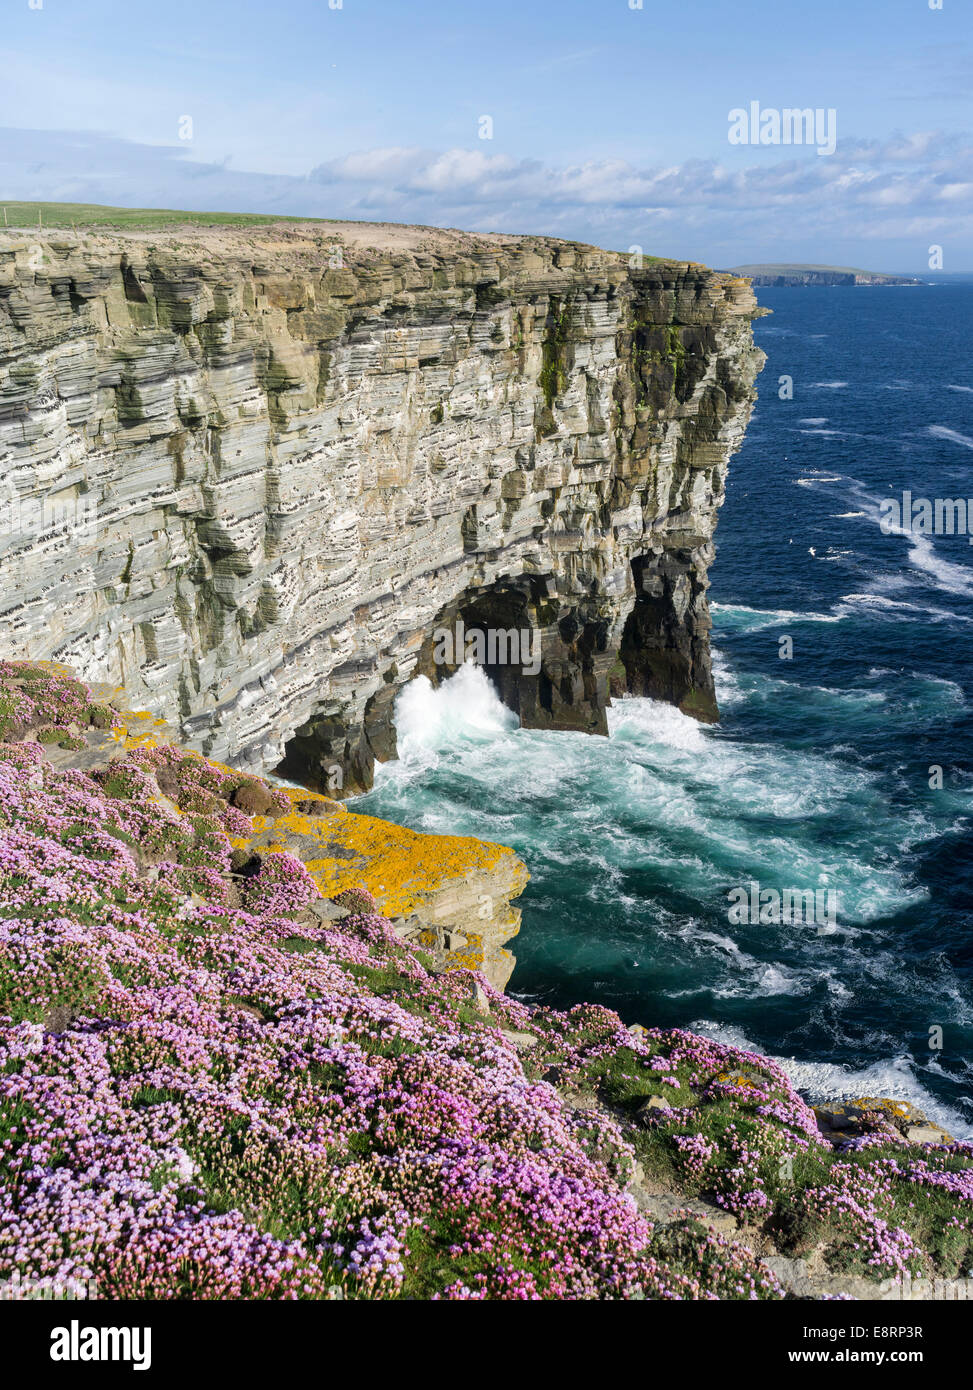 The cliffs at Noup Head on Westray island, home to one of the largest sea bird colonies in the UK, Orkney islands, Scotland. Stock Photo